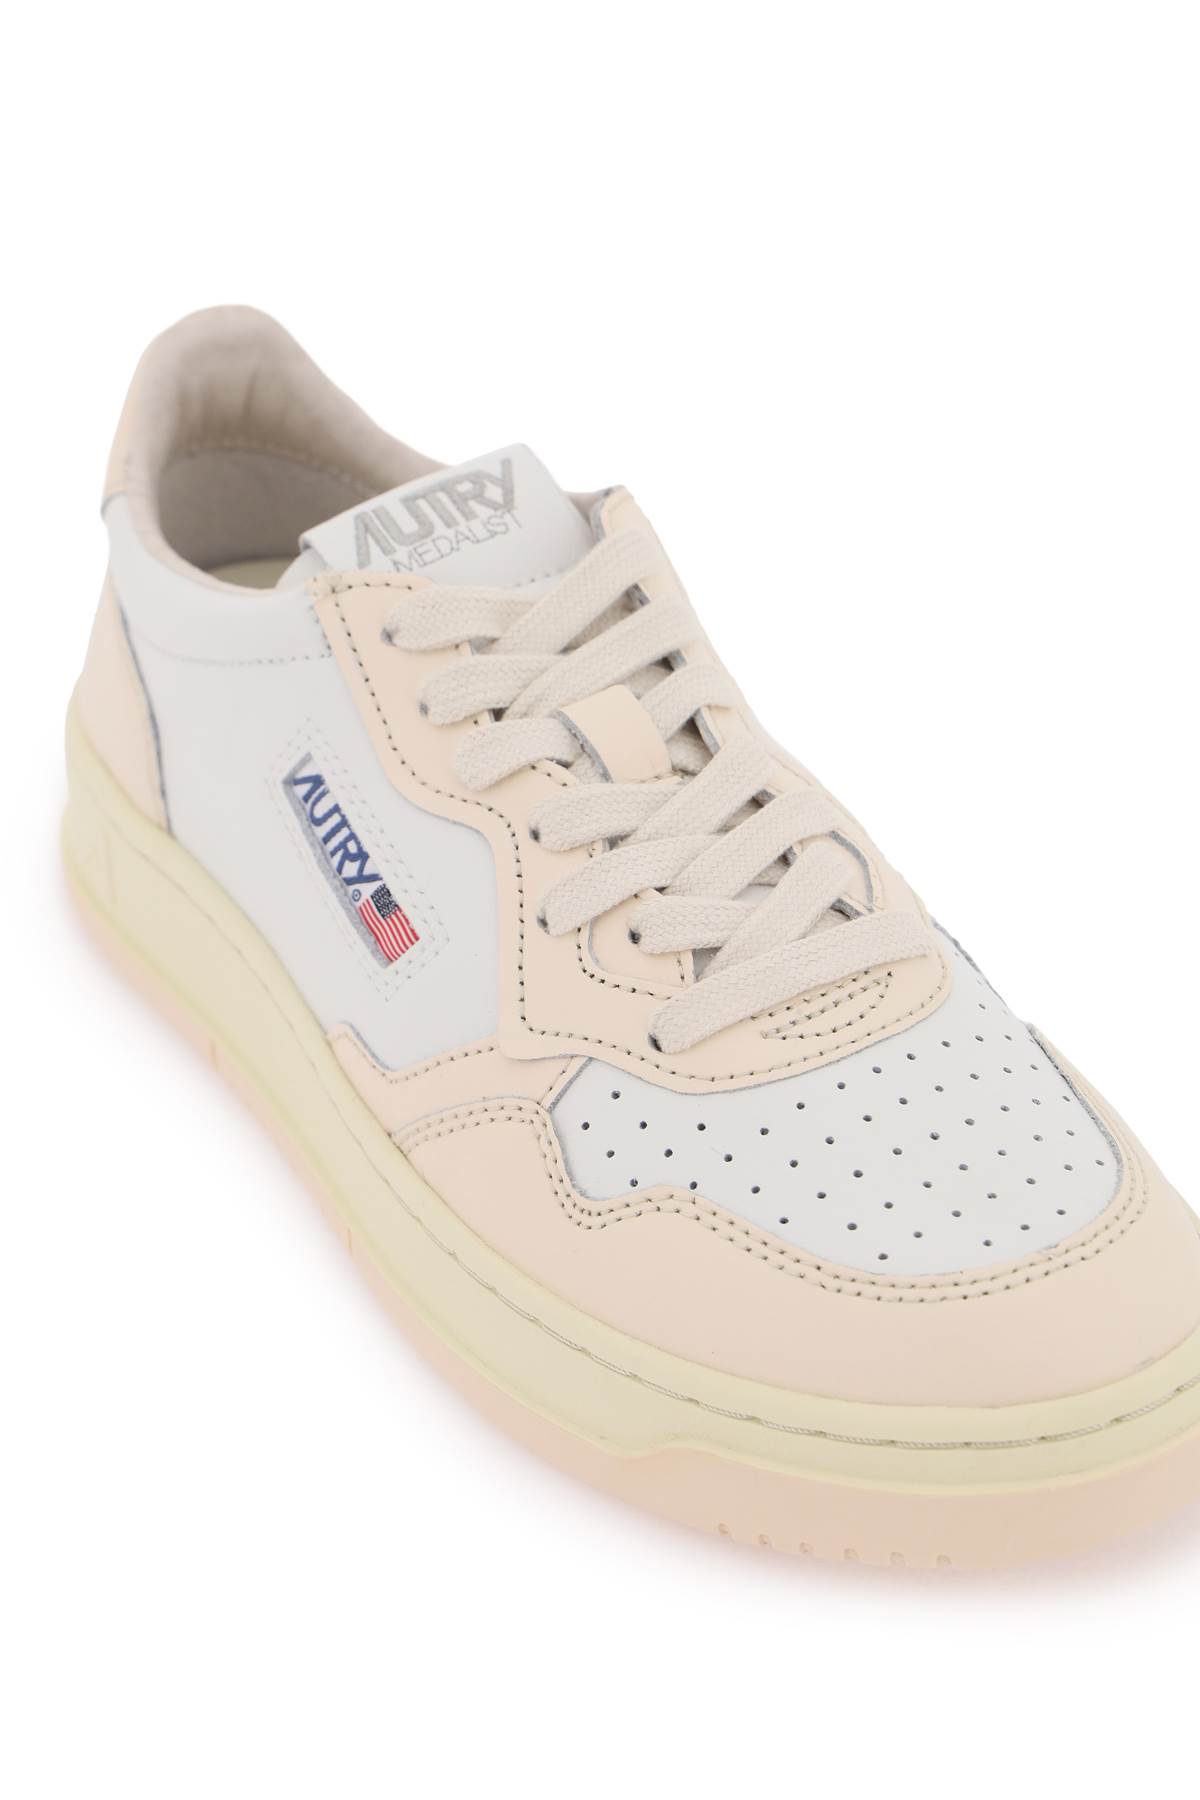 Shop Autry Leather Medalist Low Sneakers In White Denim